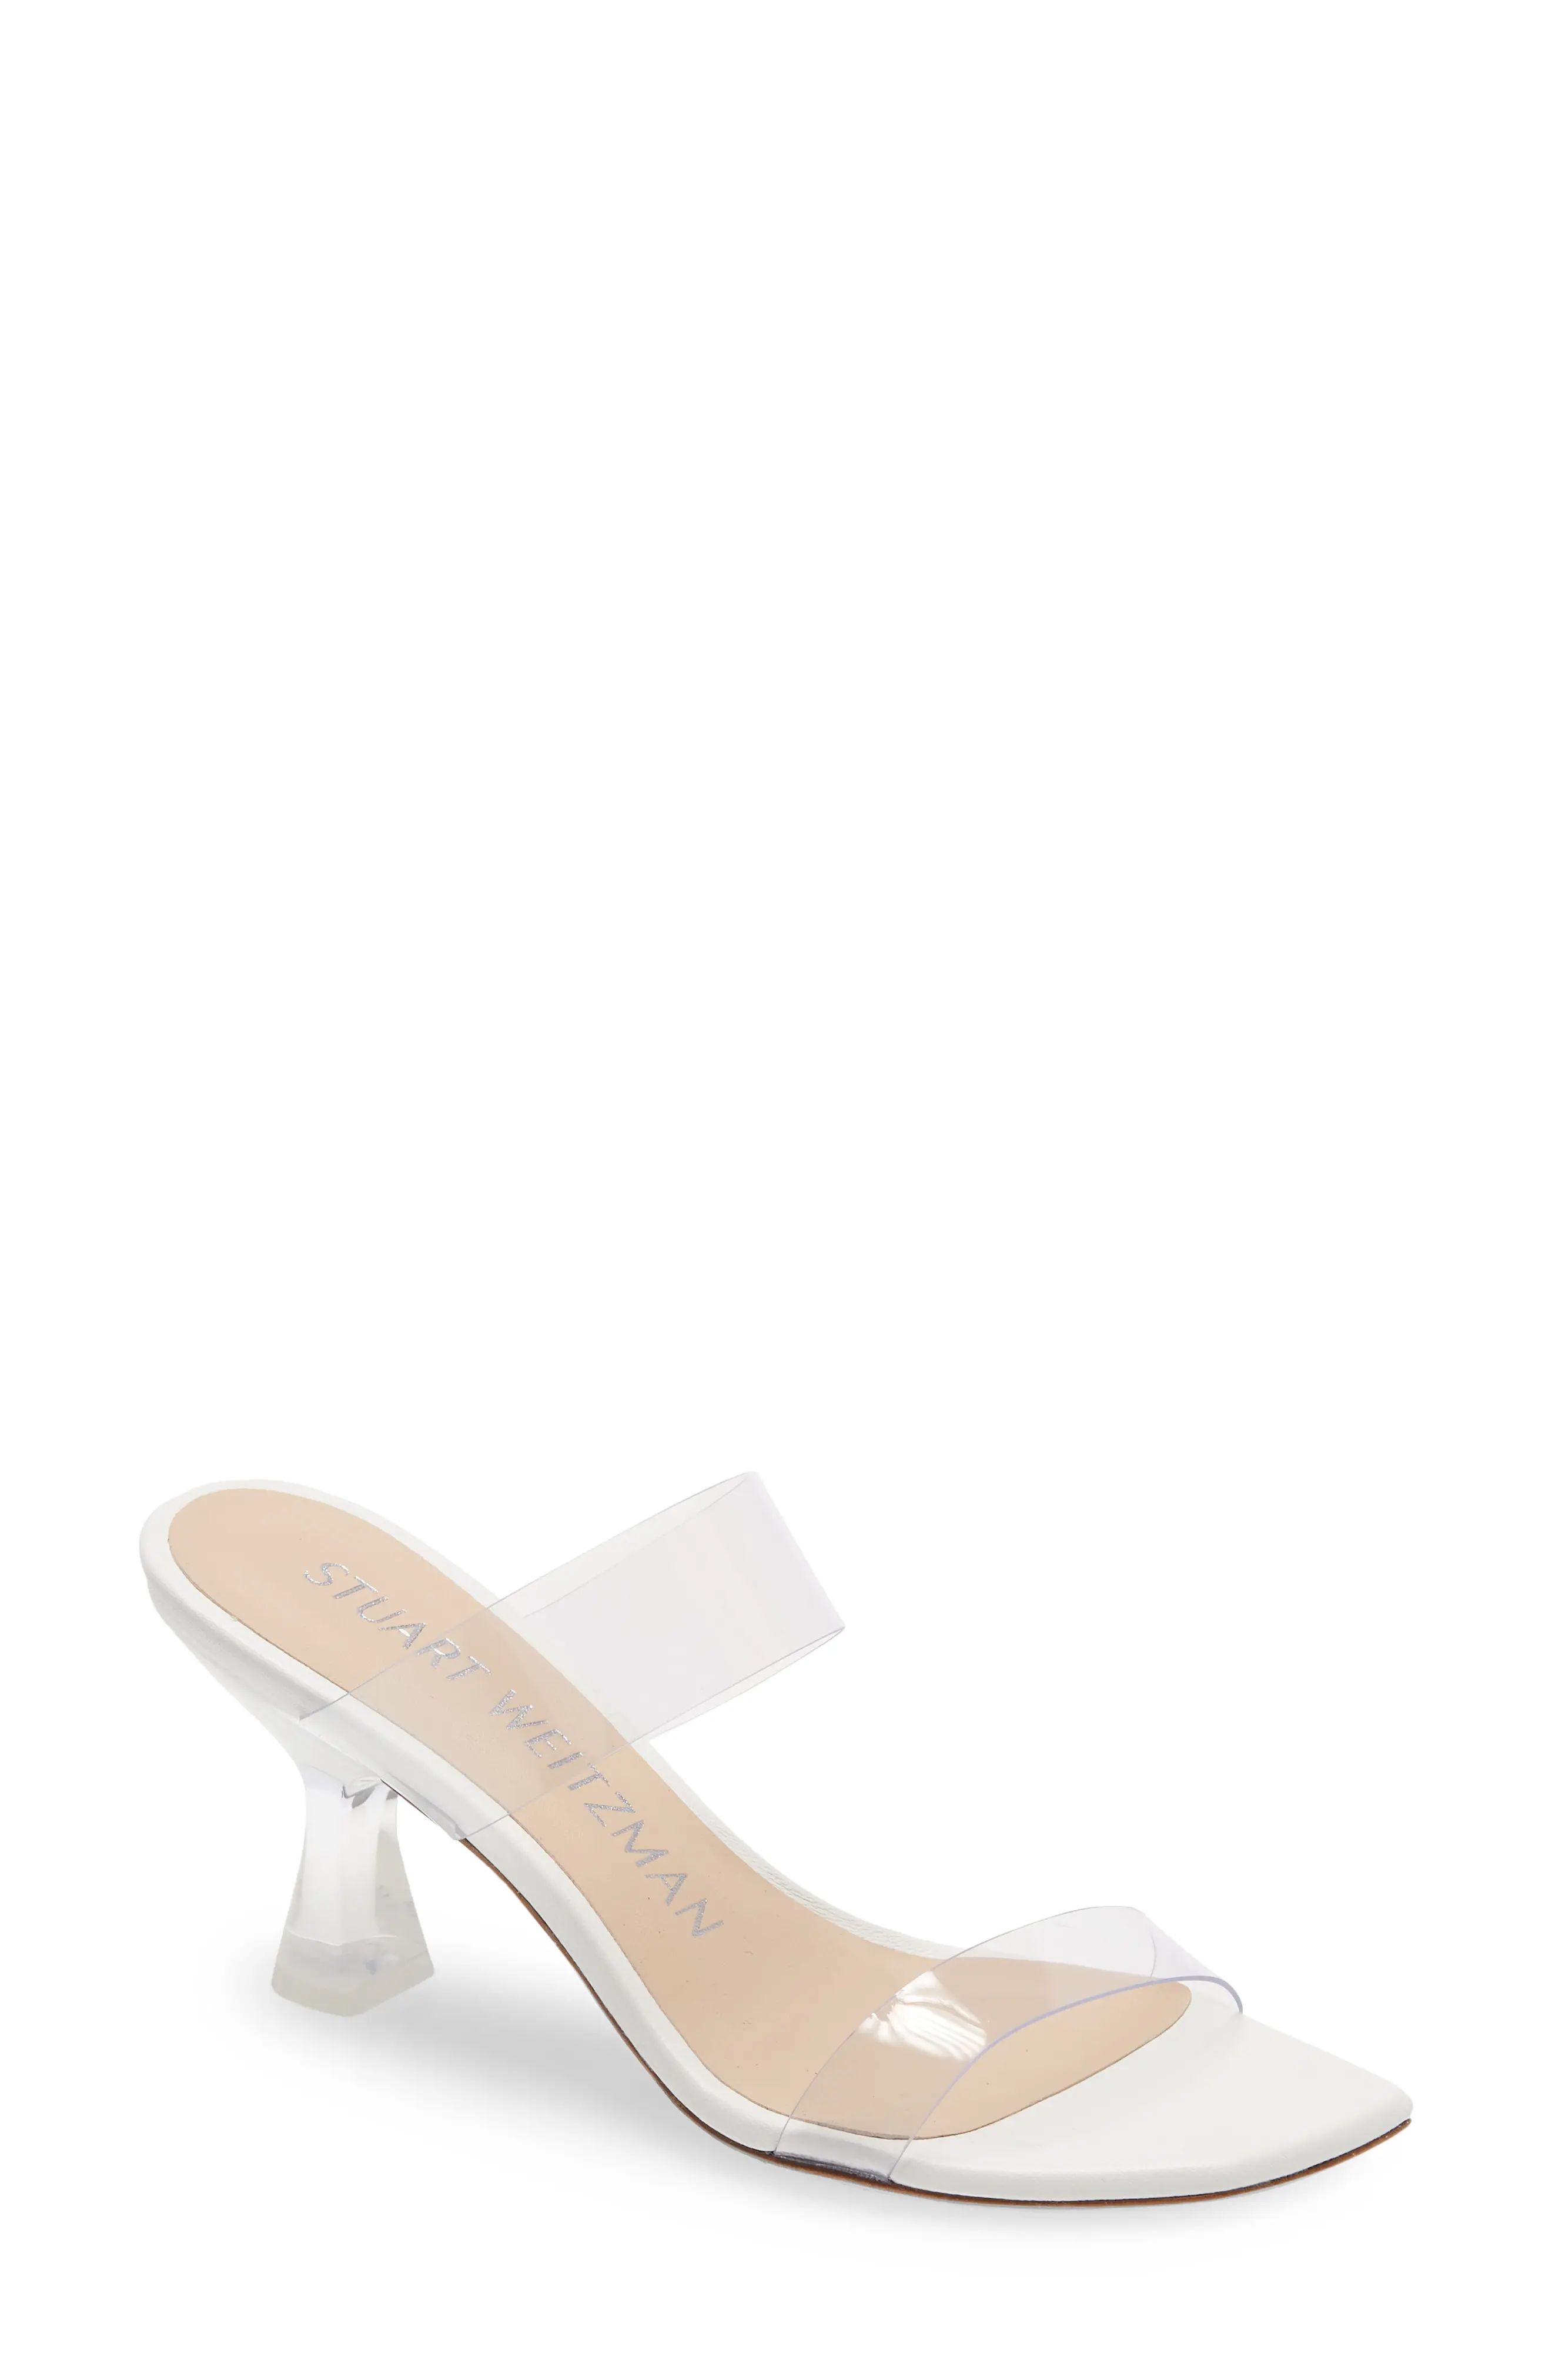 Stuart Weitzman Kristal Clear Sandal in Clear/White at Nordstrom, Size 5 | Nordstrom